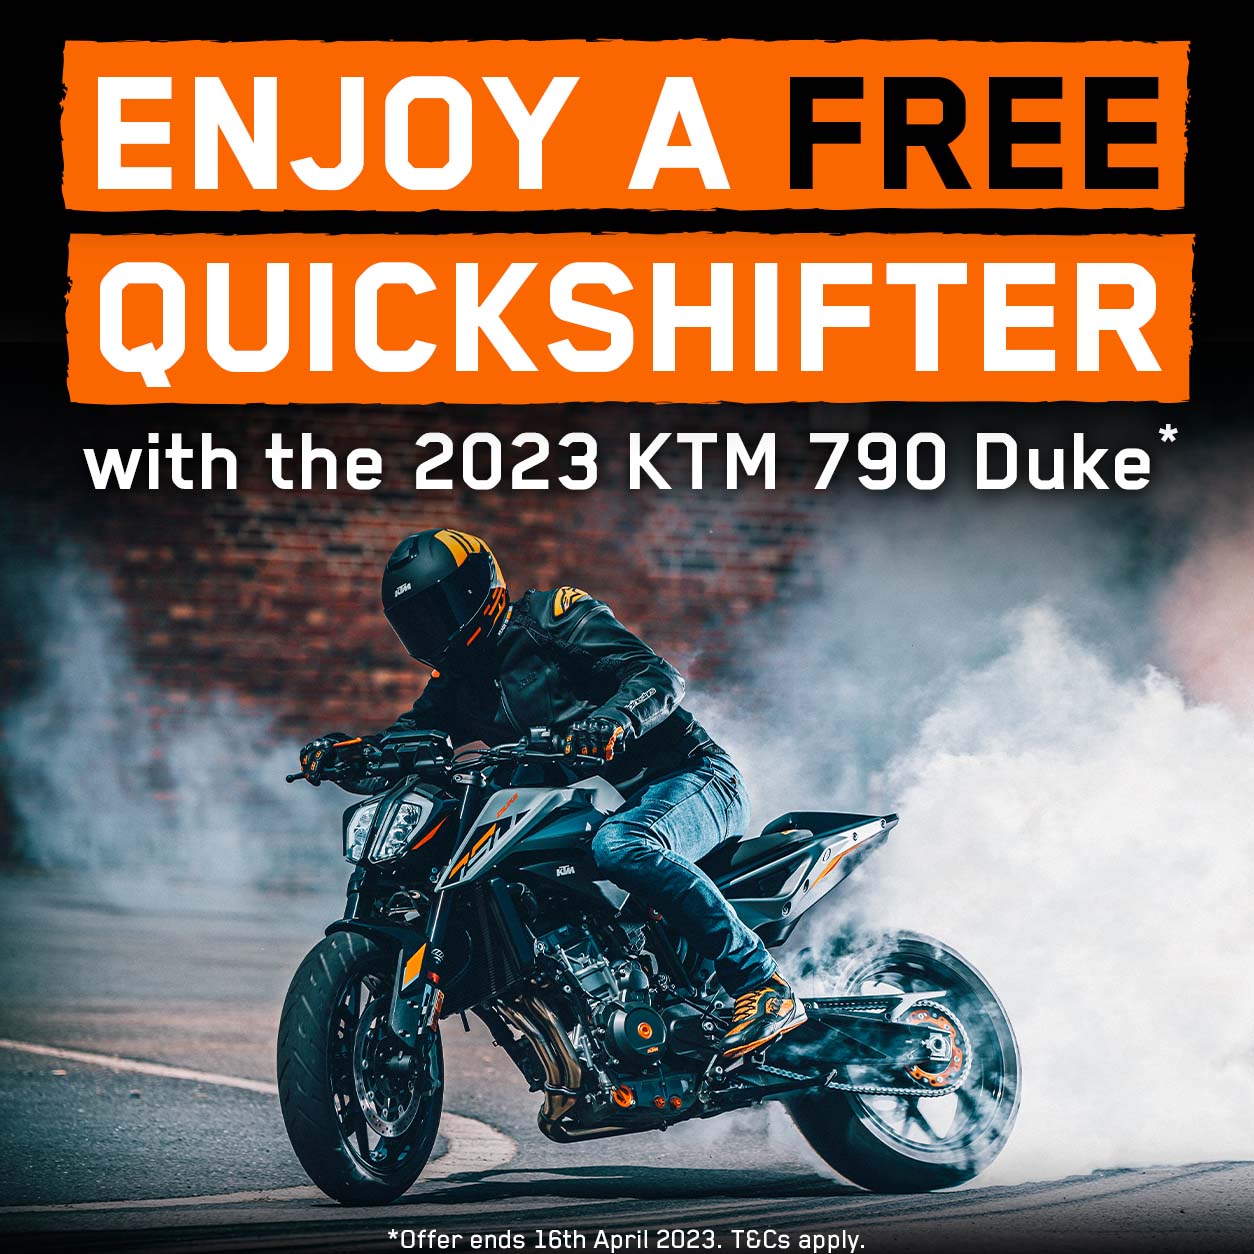 Enjoy a free quickshifter with the 2023 KTM 790 Duke at Laguna Motorcycles